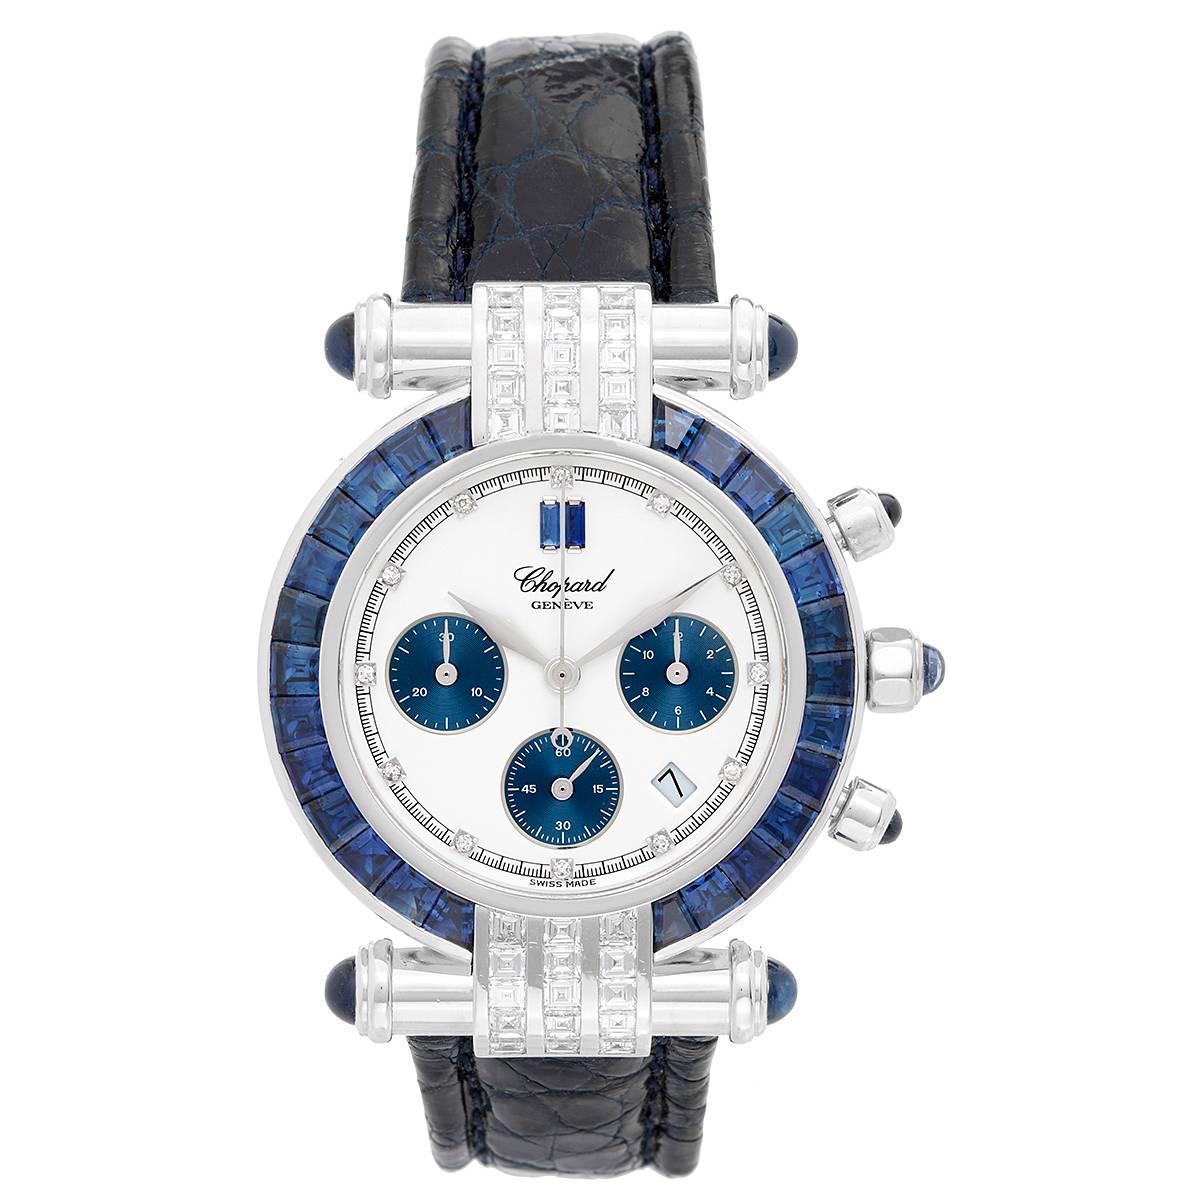 Chopard Imperial White Gold with Diamonds and Sapphires -  Quartz. Round White Gold ( 38 mm ). 26 Sapphire bezel. White dial with diamond markers; 3 blue sub dials. Blue alligator strap. Pre-owned with box.